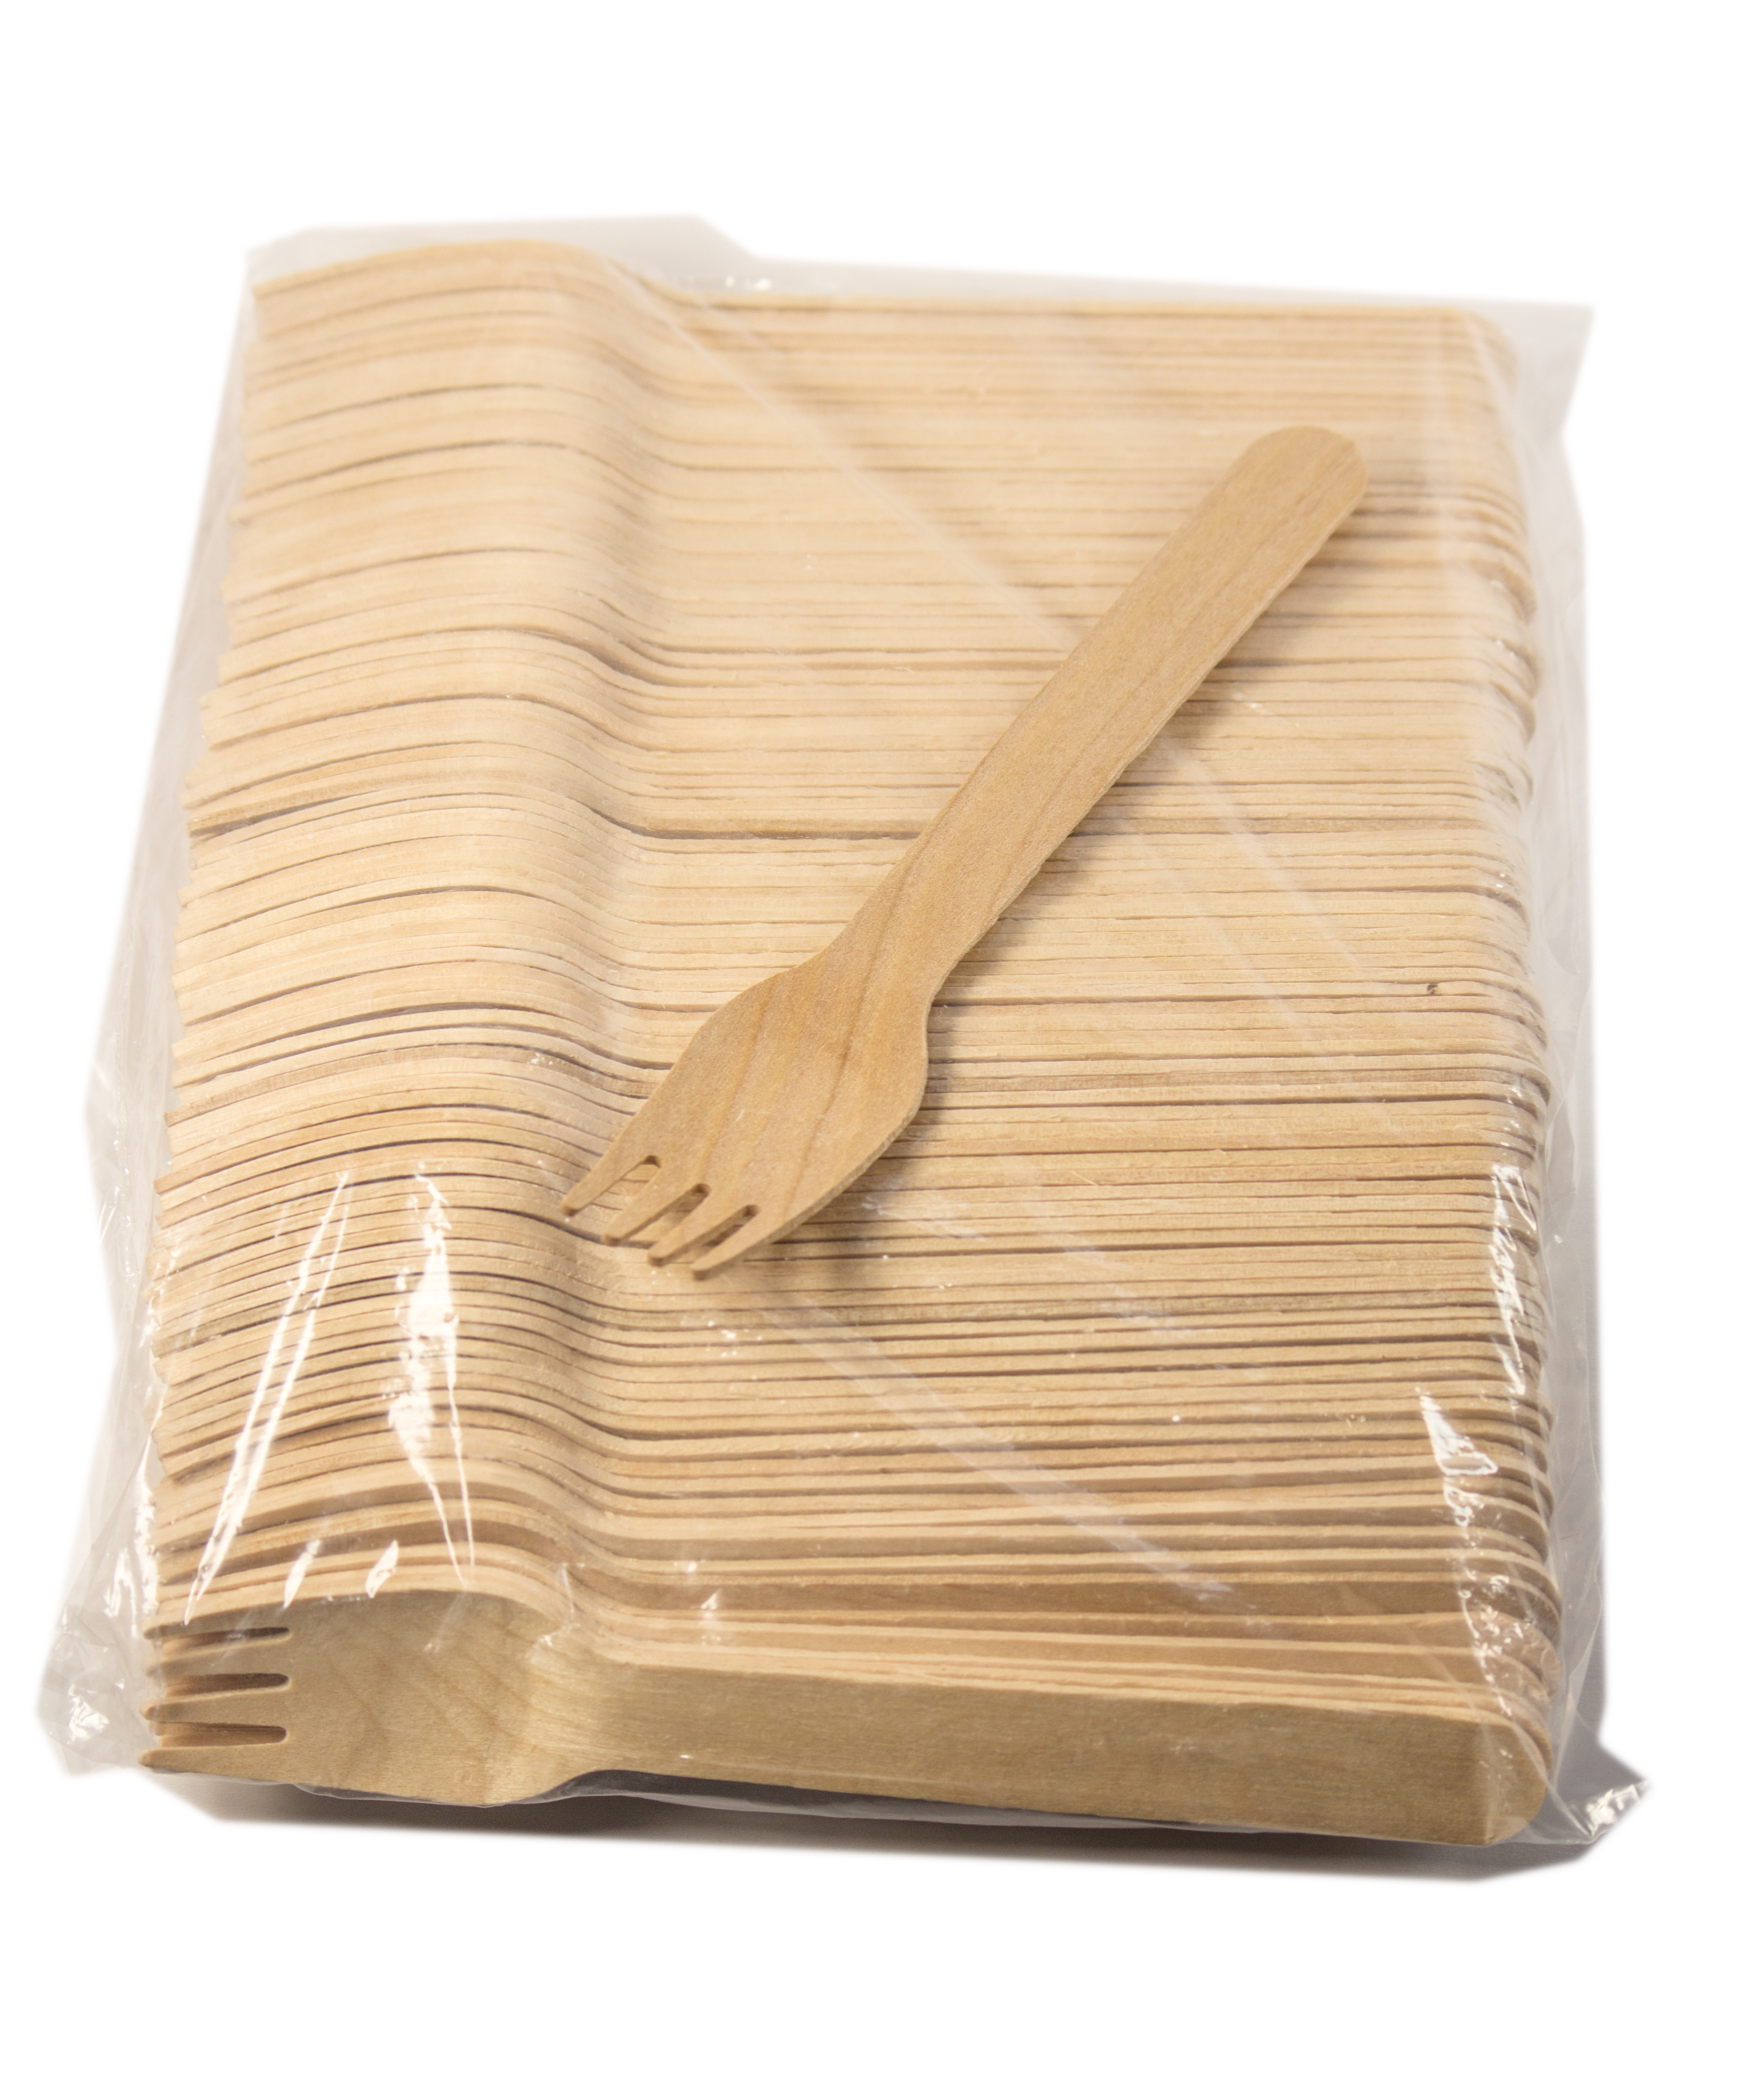 5 1/2" Wood Cutlery Forks Box of 1,000ct (Item# Green Fork 140)